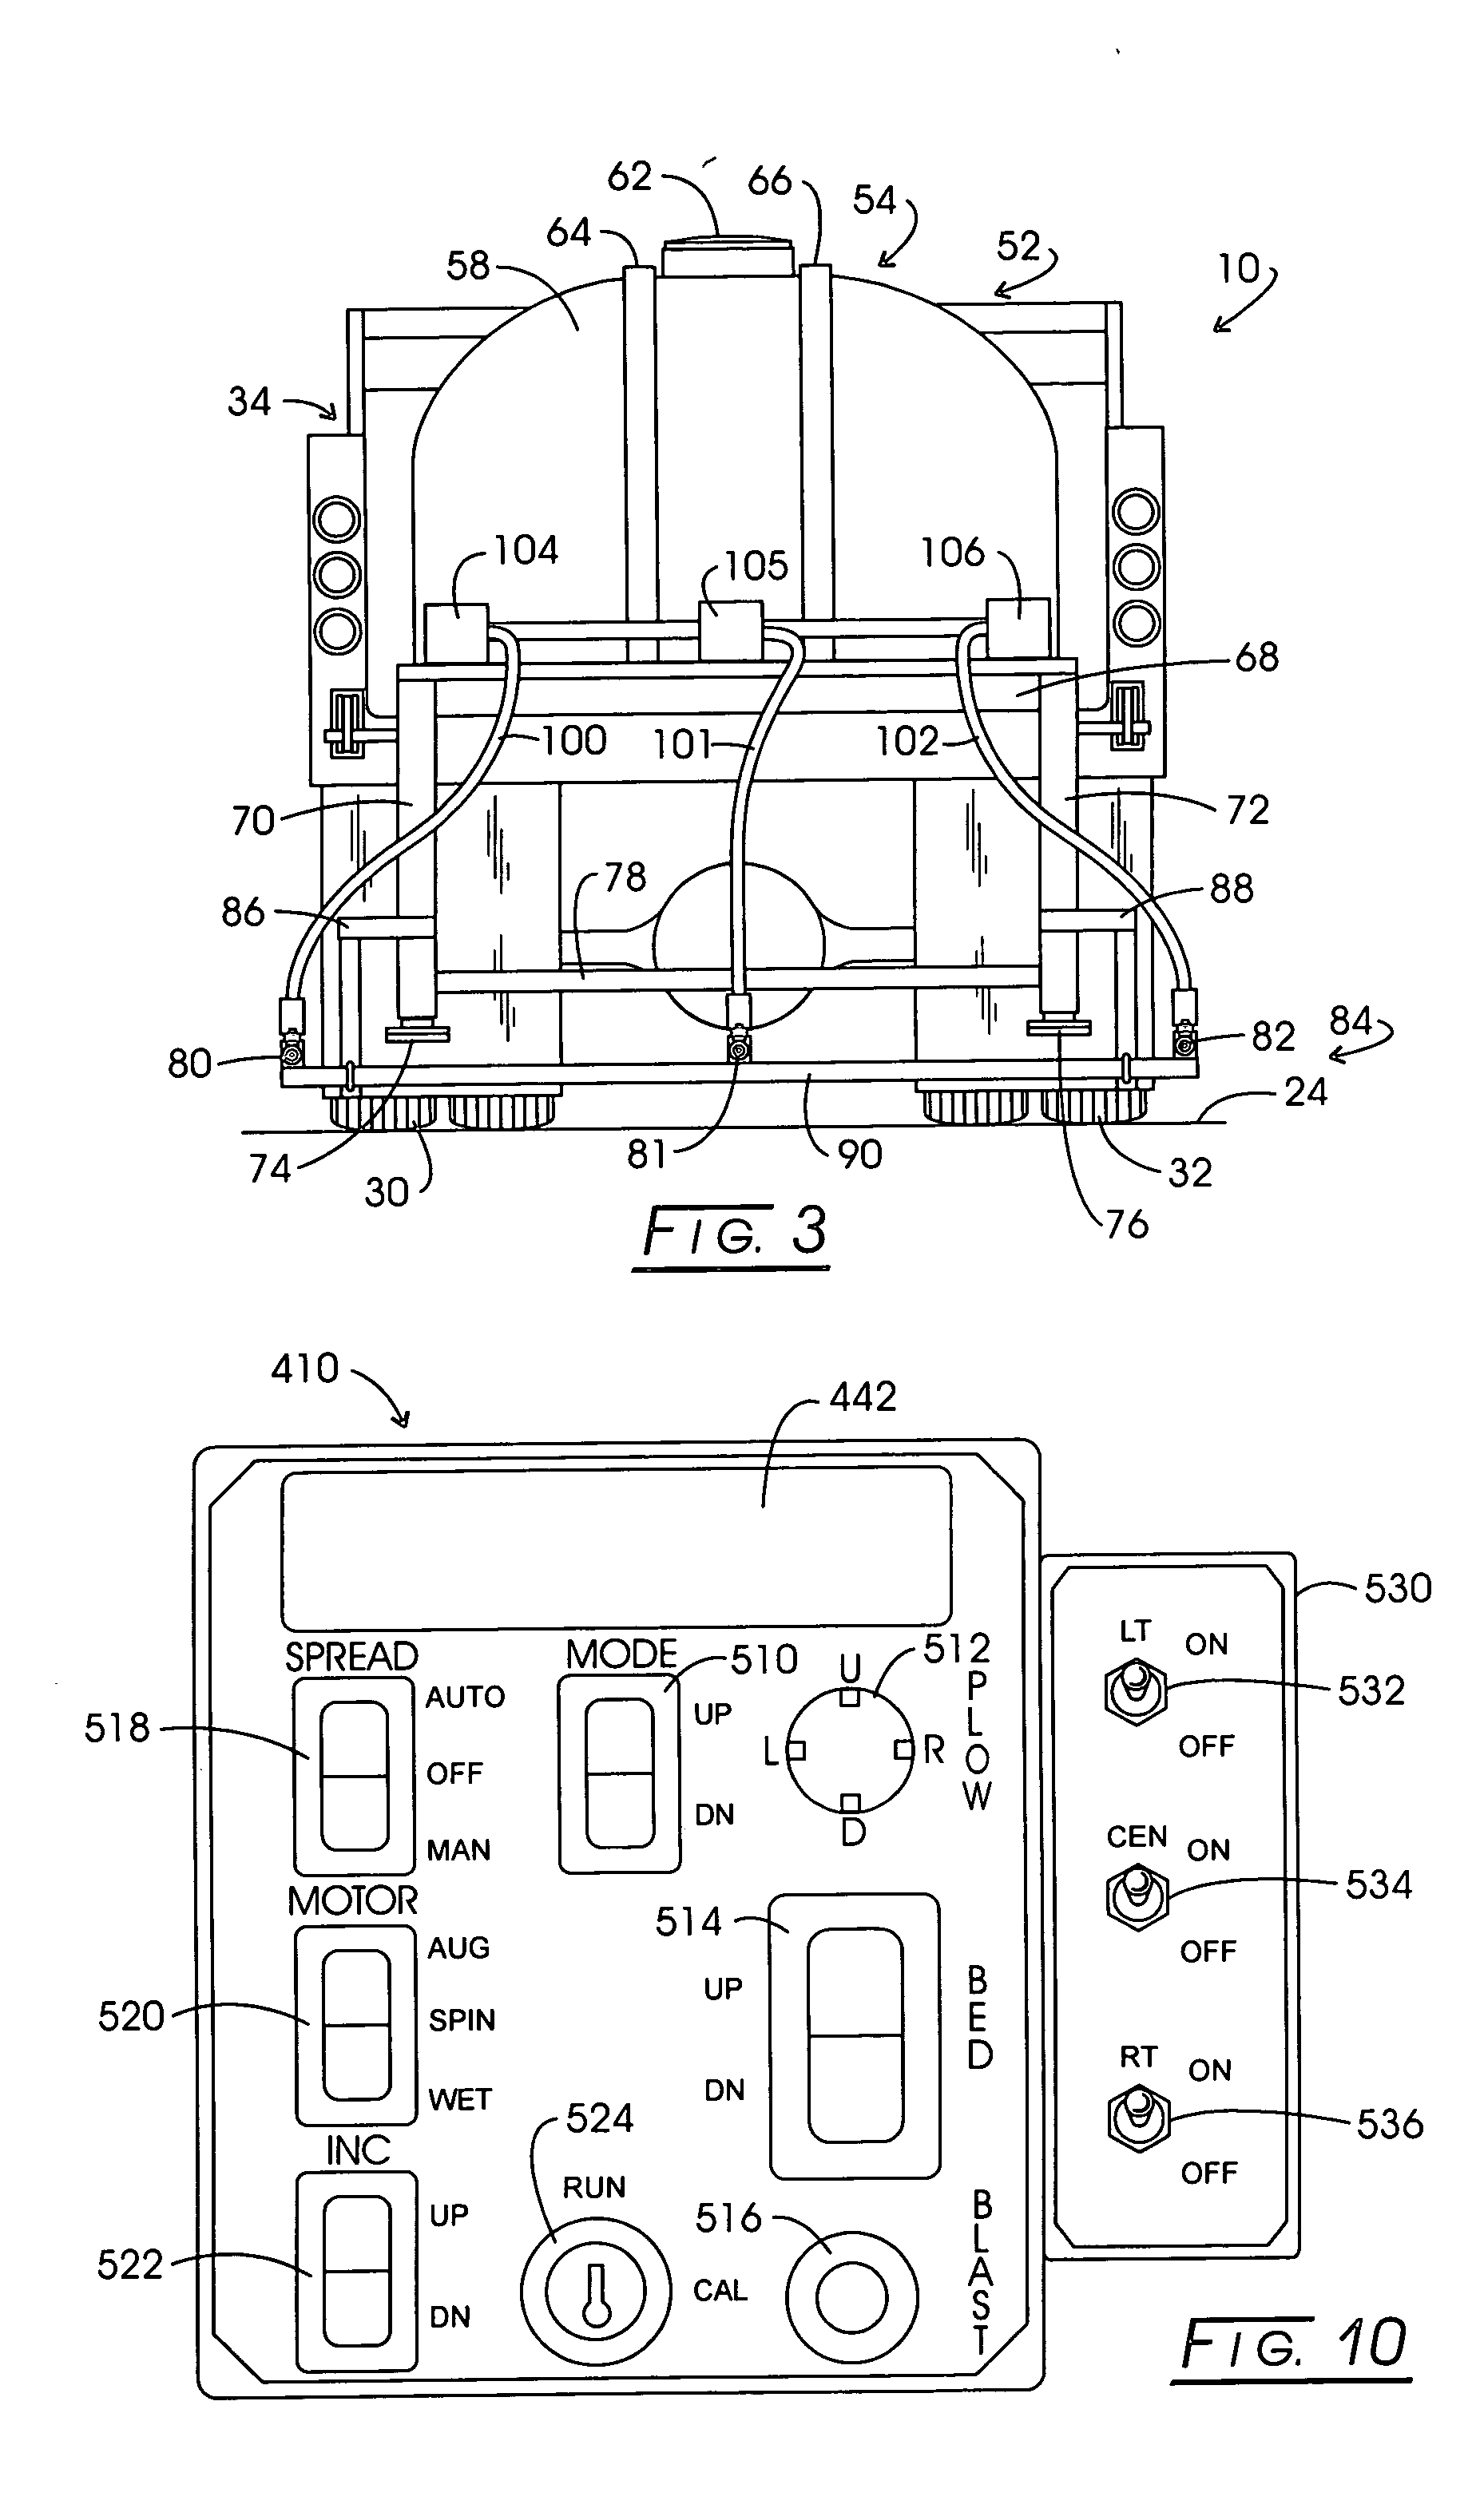 System for controlling the hydraulic actuated components of a truck